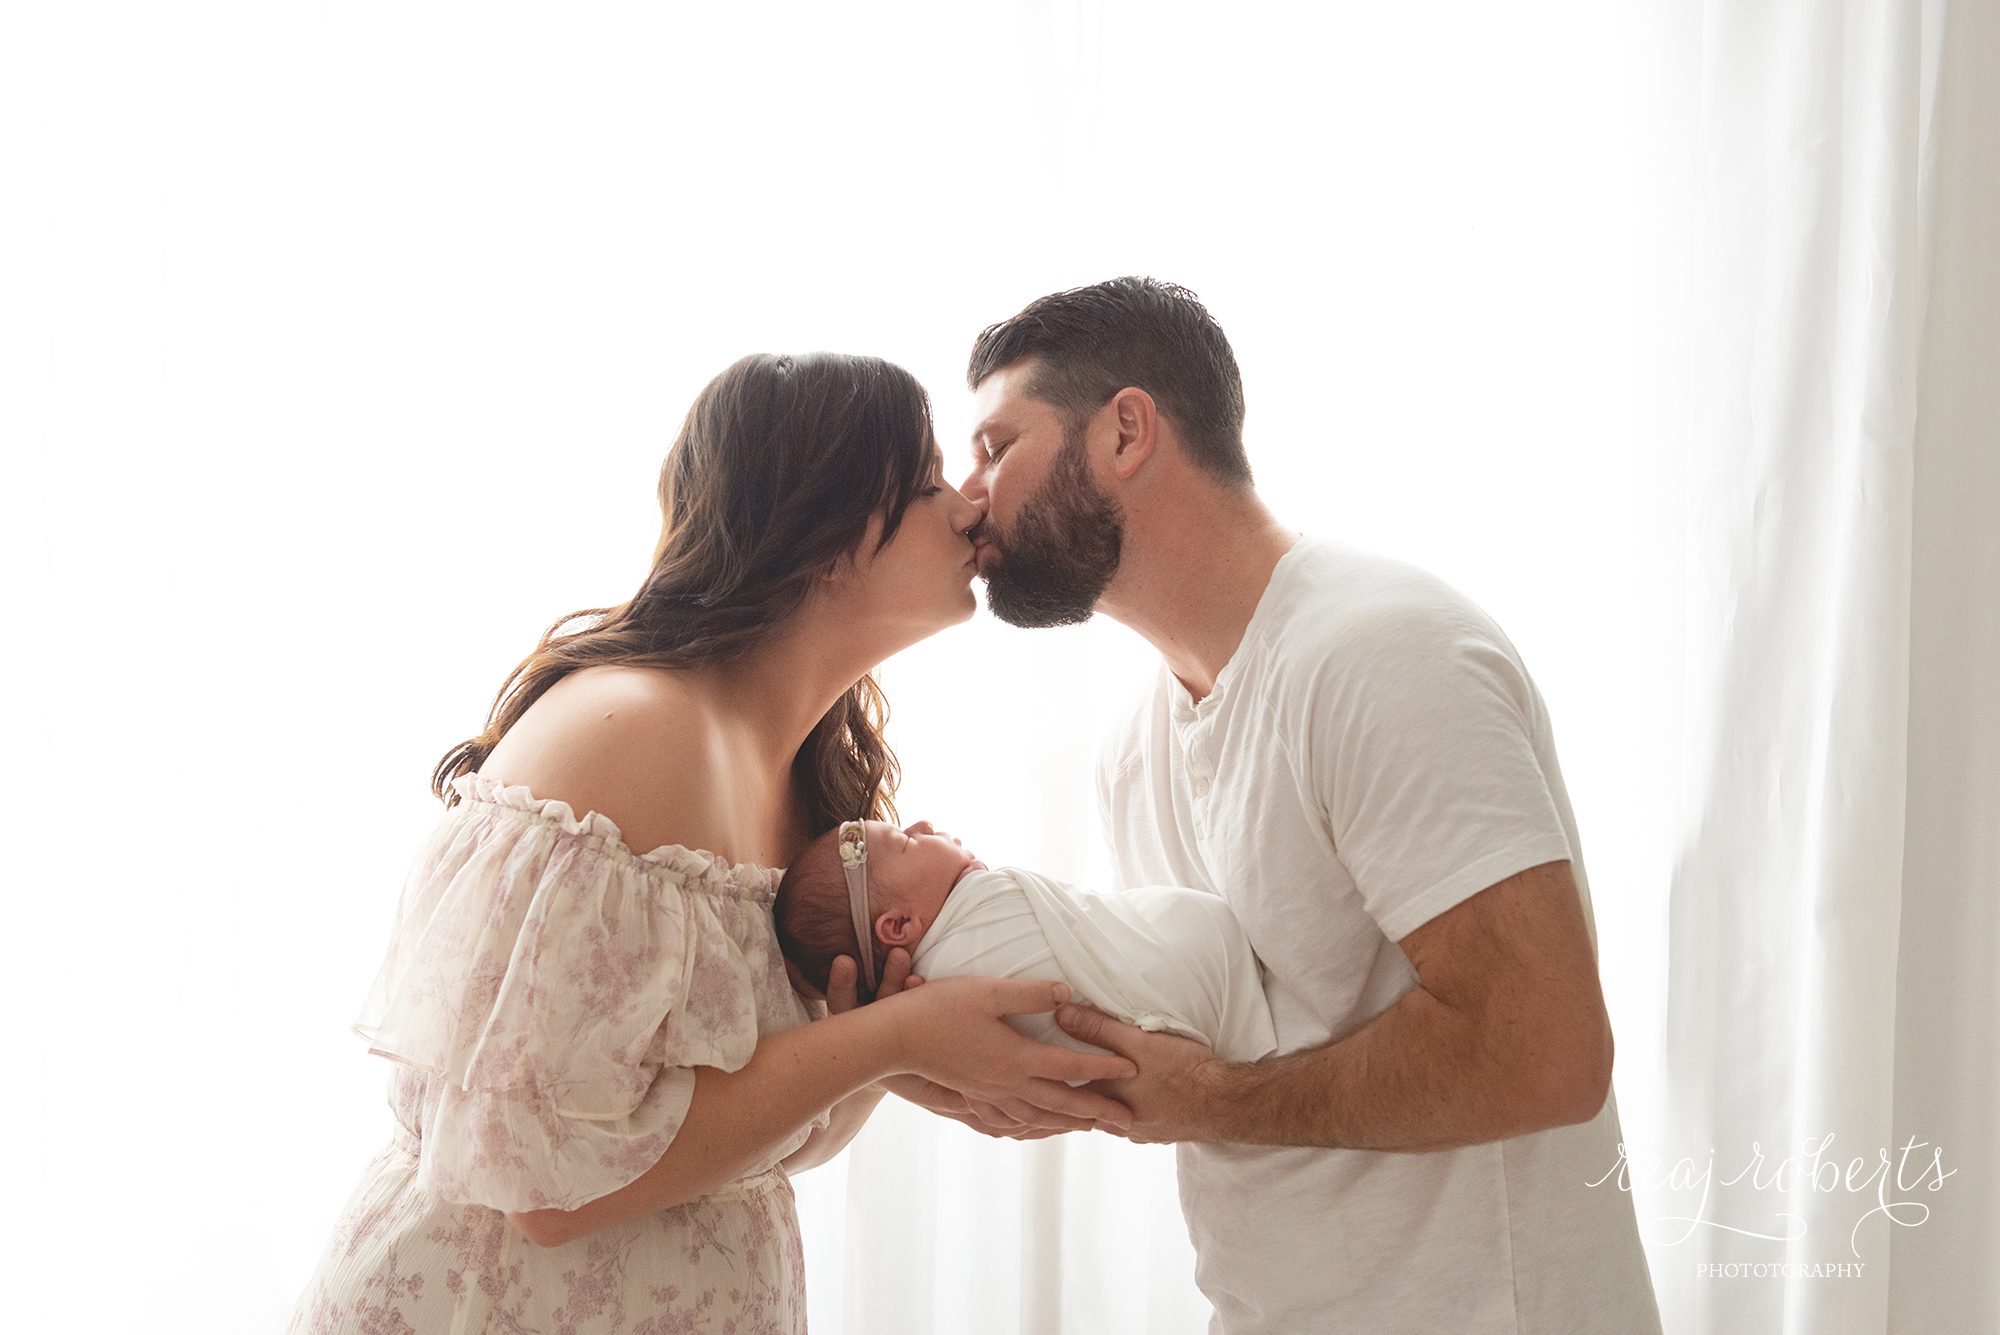 newborn photography parents holding baby in front of white window | Reaj Roberts Photography